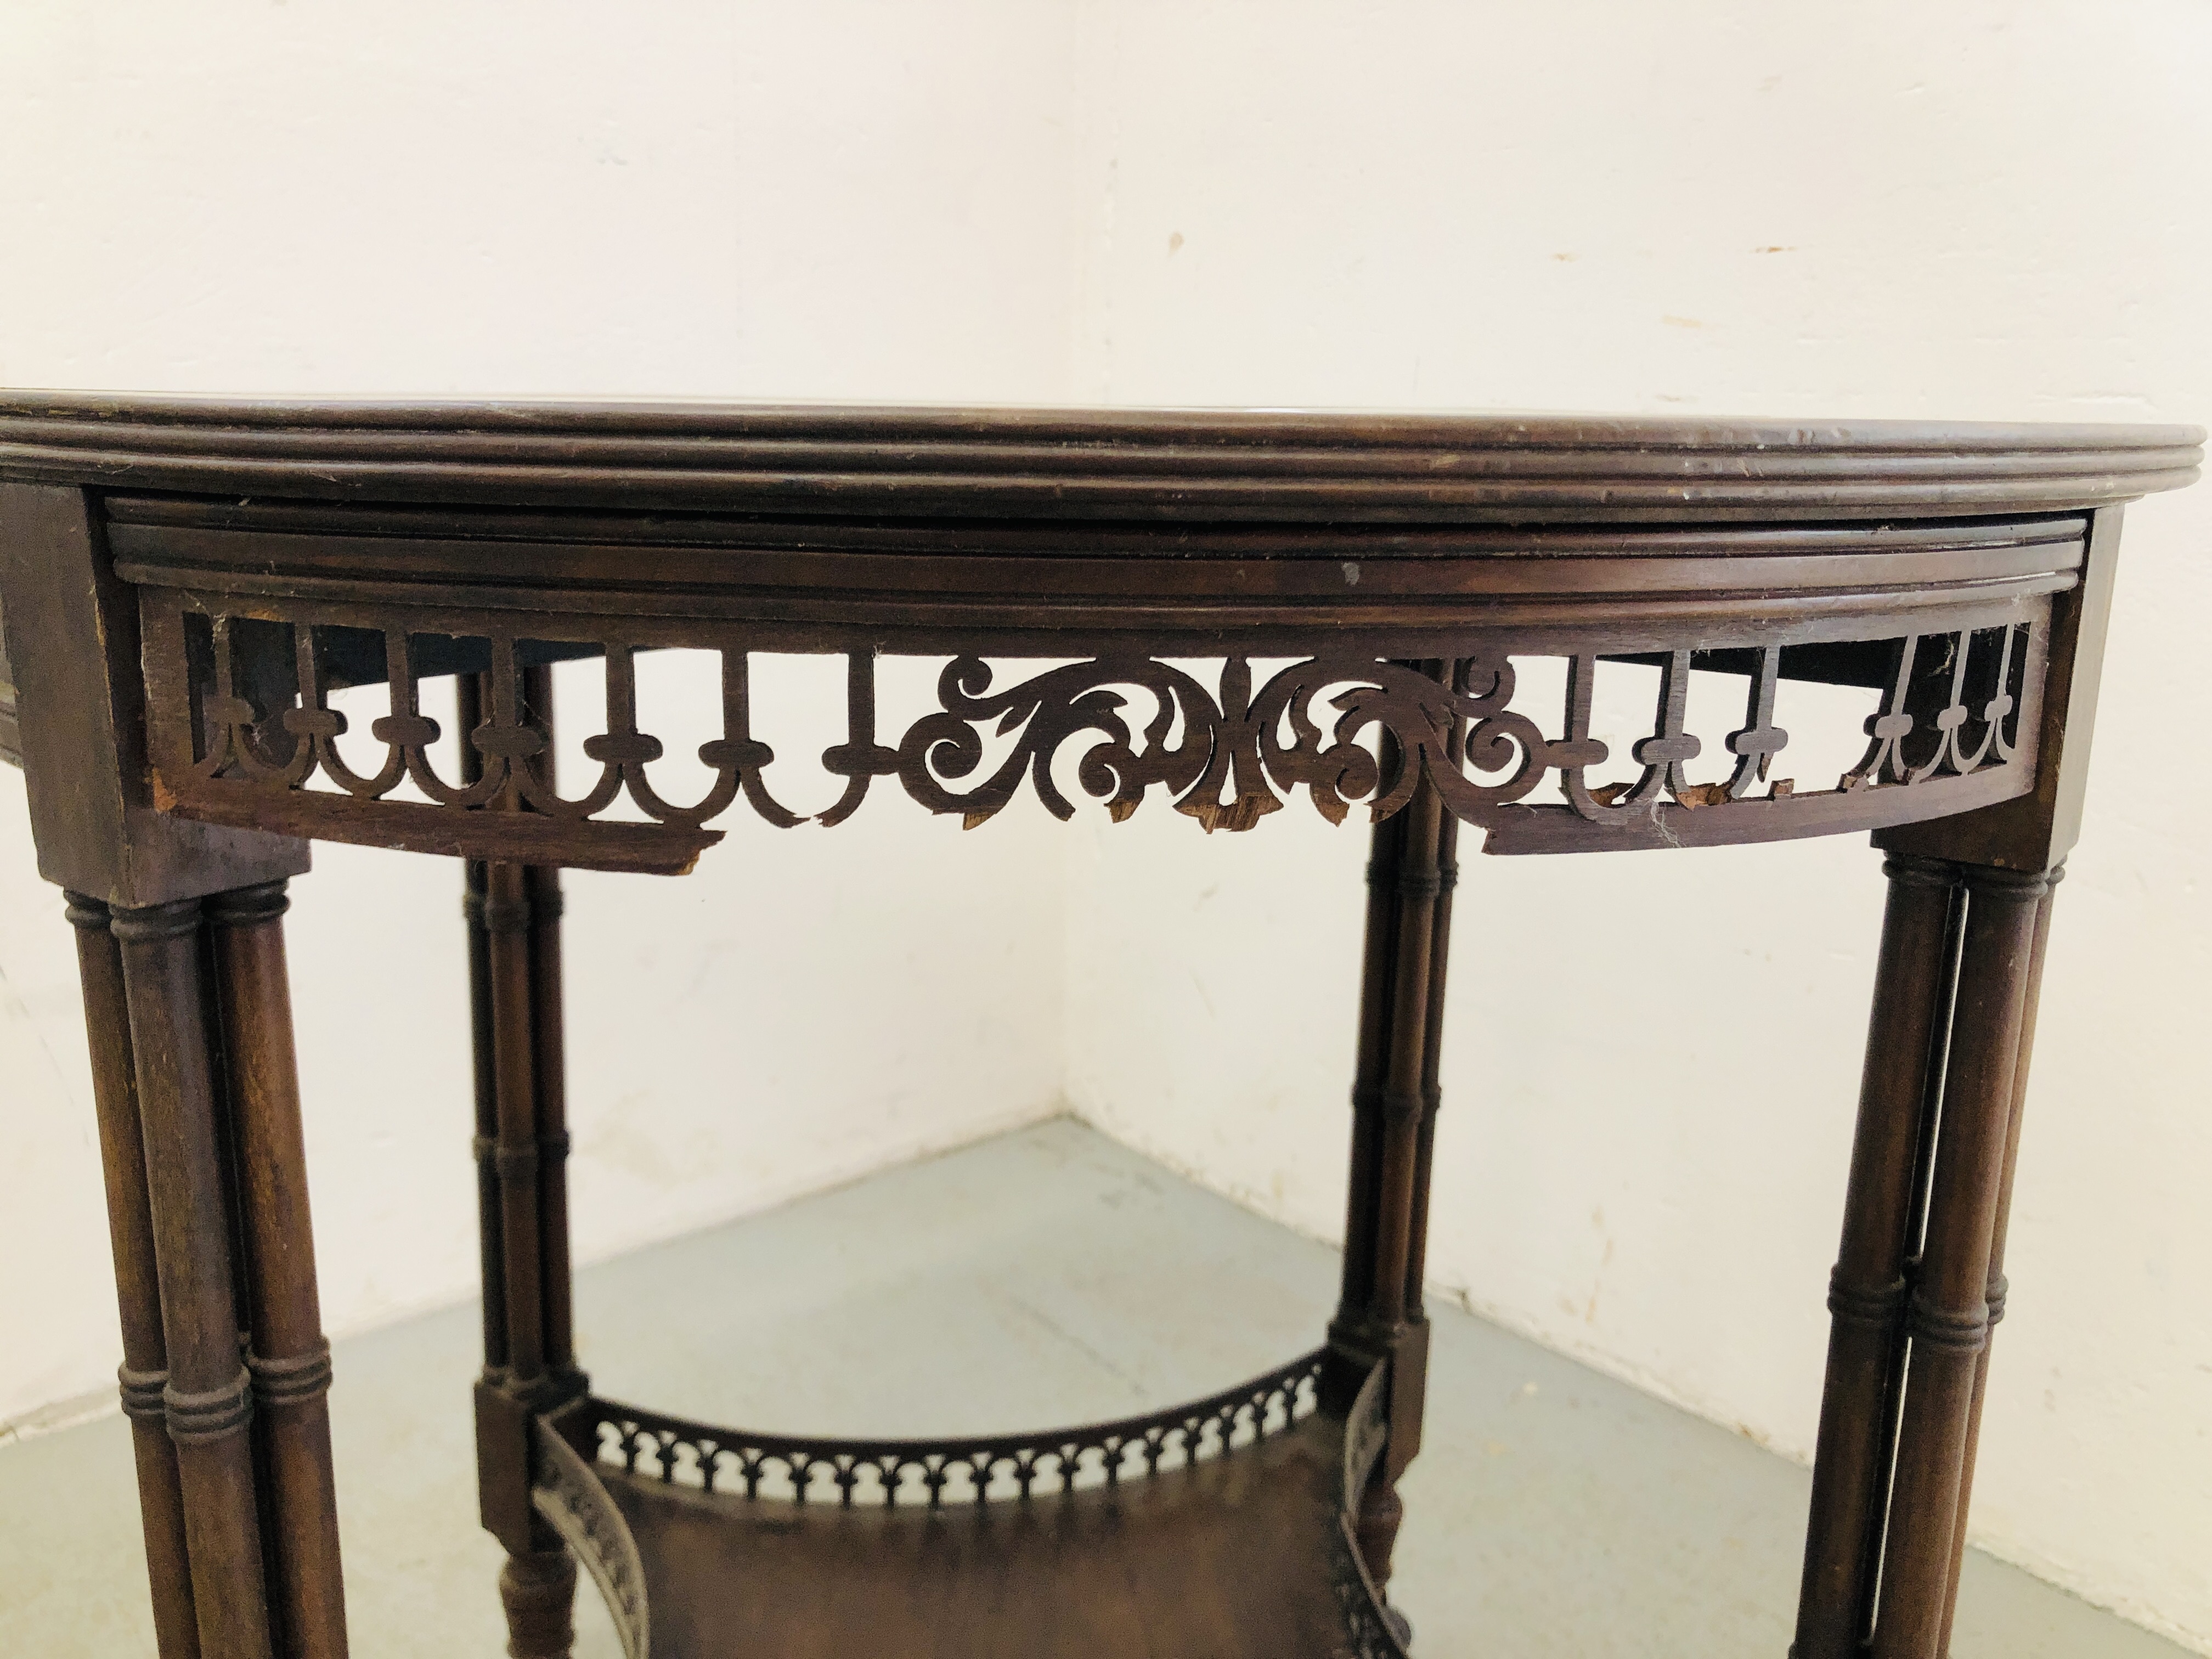 AN ANTIQUE CIRCULAR OCCASIONAL TABLE WITH FRET WORK DETAIL AND GALLERIED SHELF BELOW EACH LEGS - Image 4 of 10